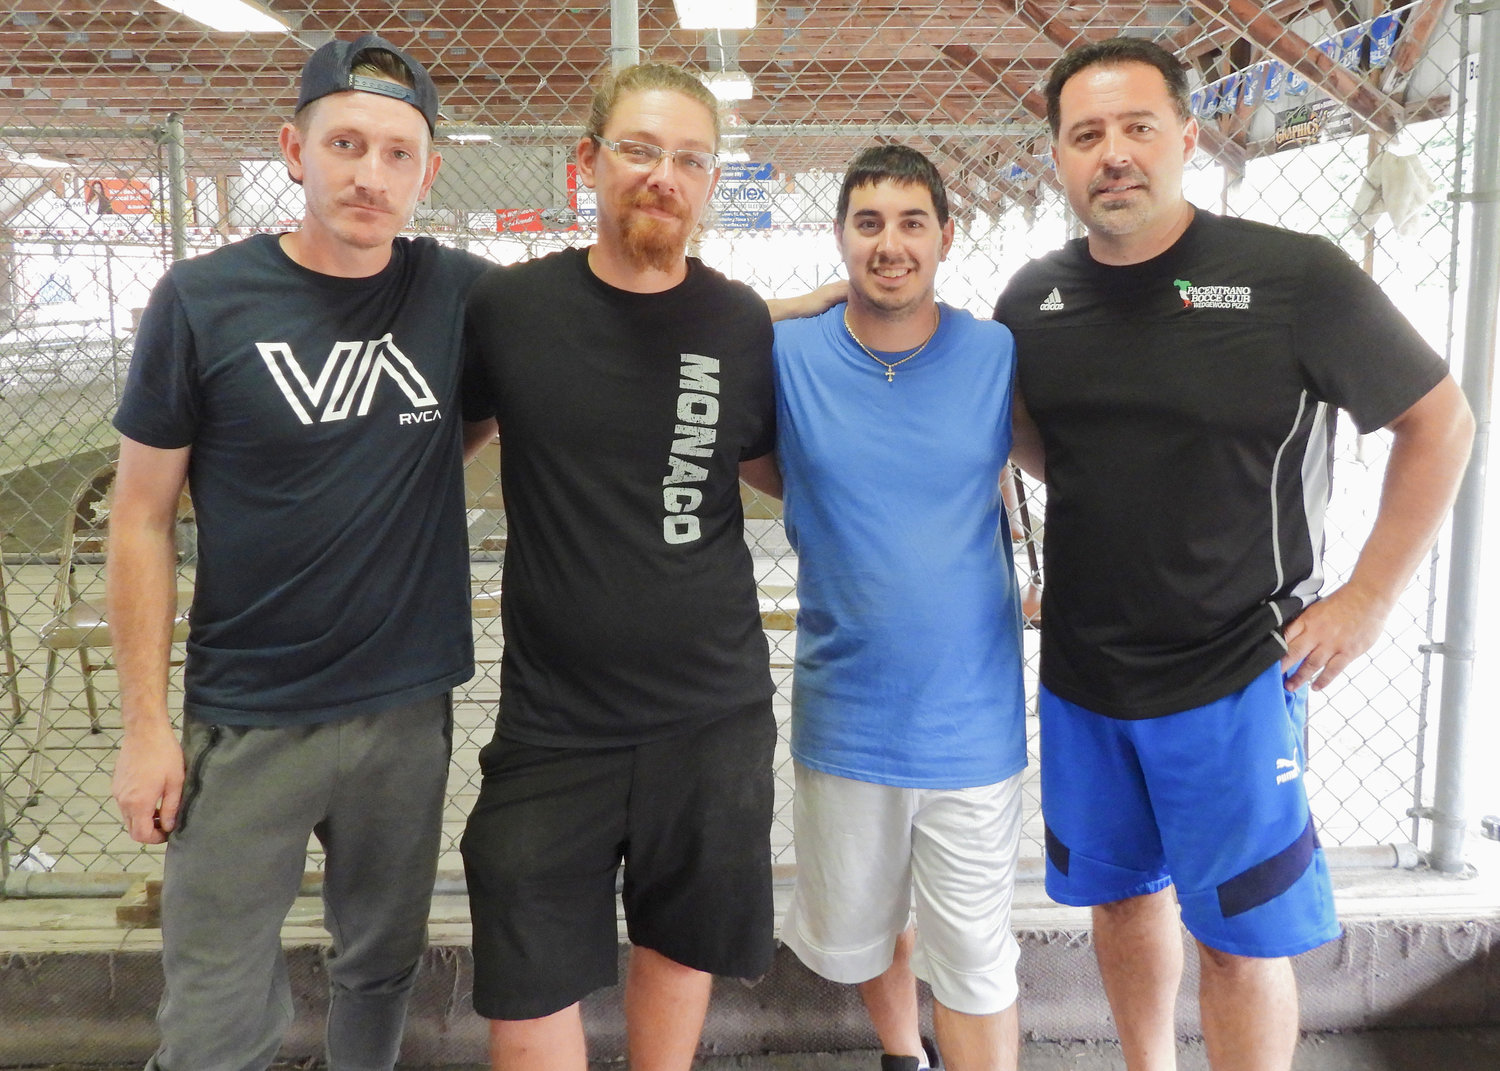 Tri-State Bocce, comprised of, from left, Tim Wilson, James Oma, Ron Reeher and Gianni Colaizzi were the open division runner-ups.